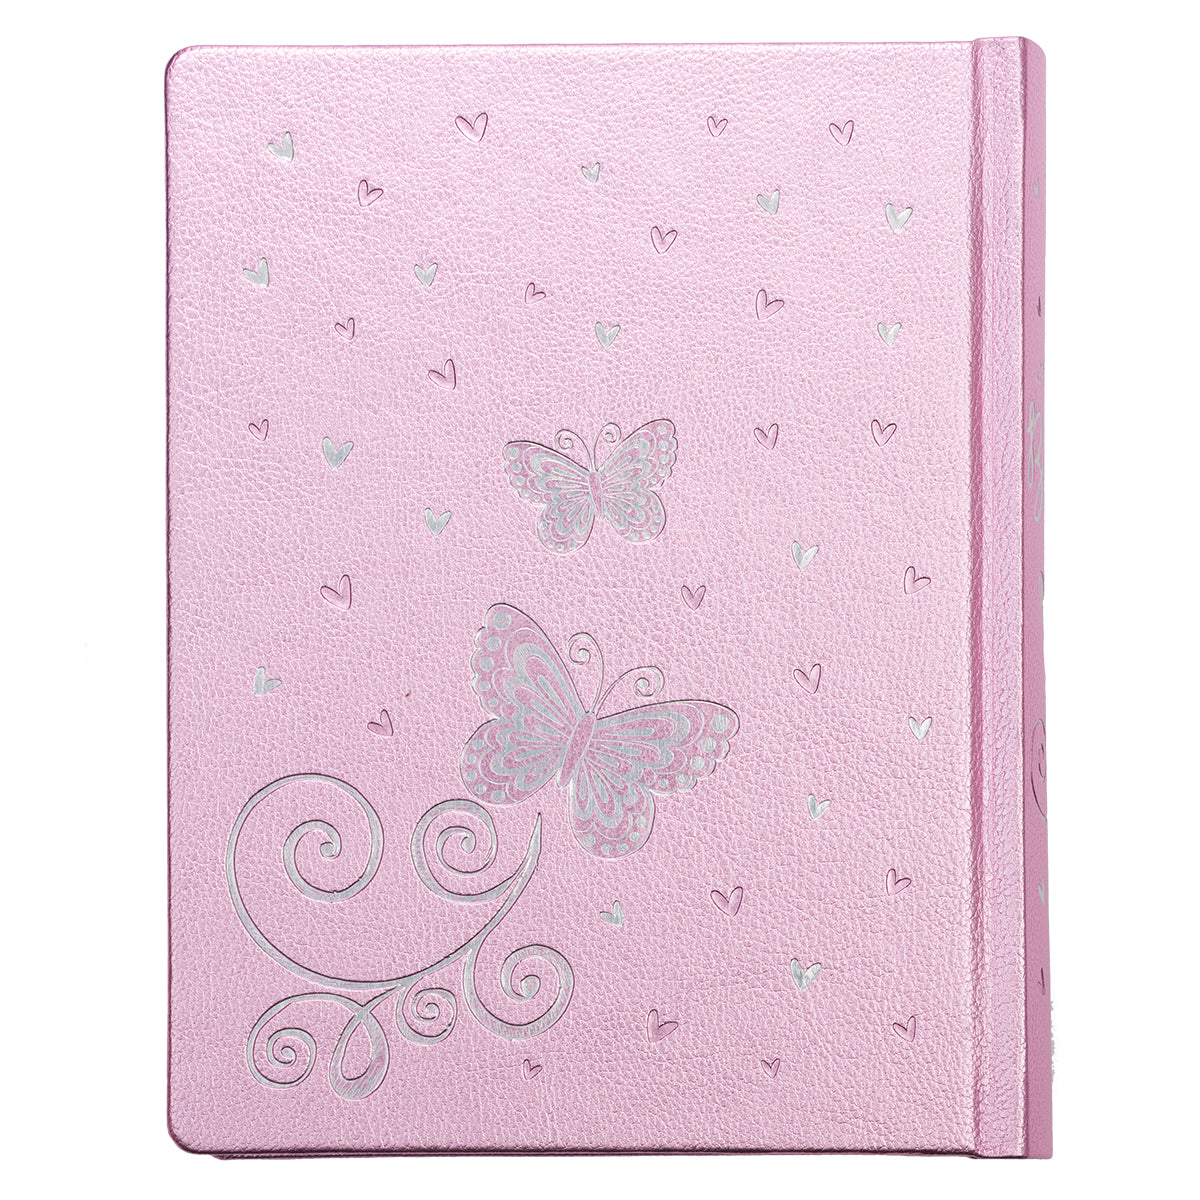 Image of My Creative Bible Pink Salsa Hardcover other